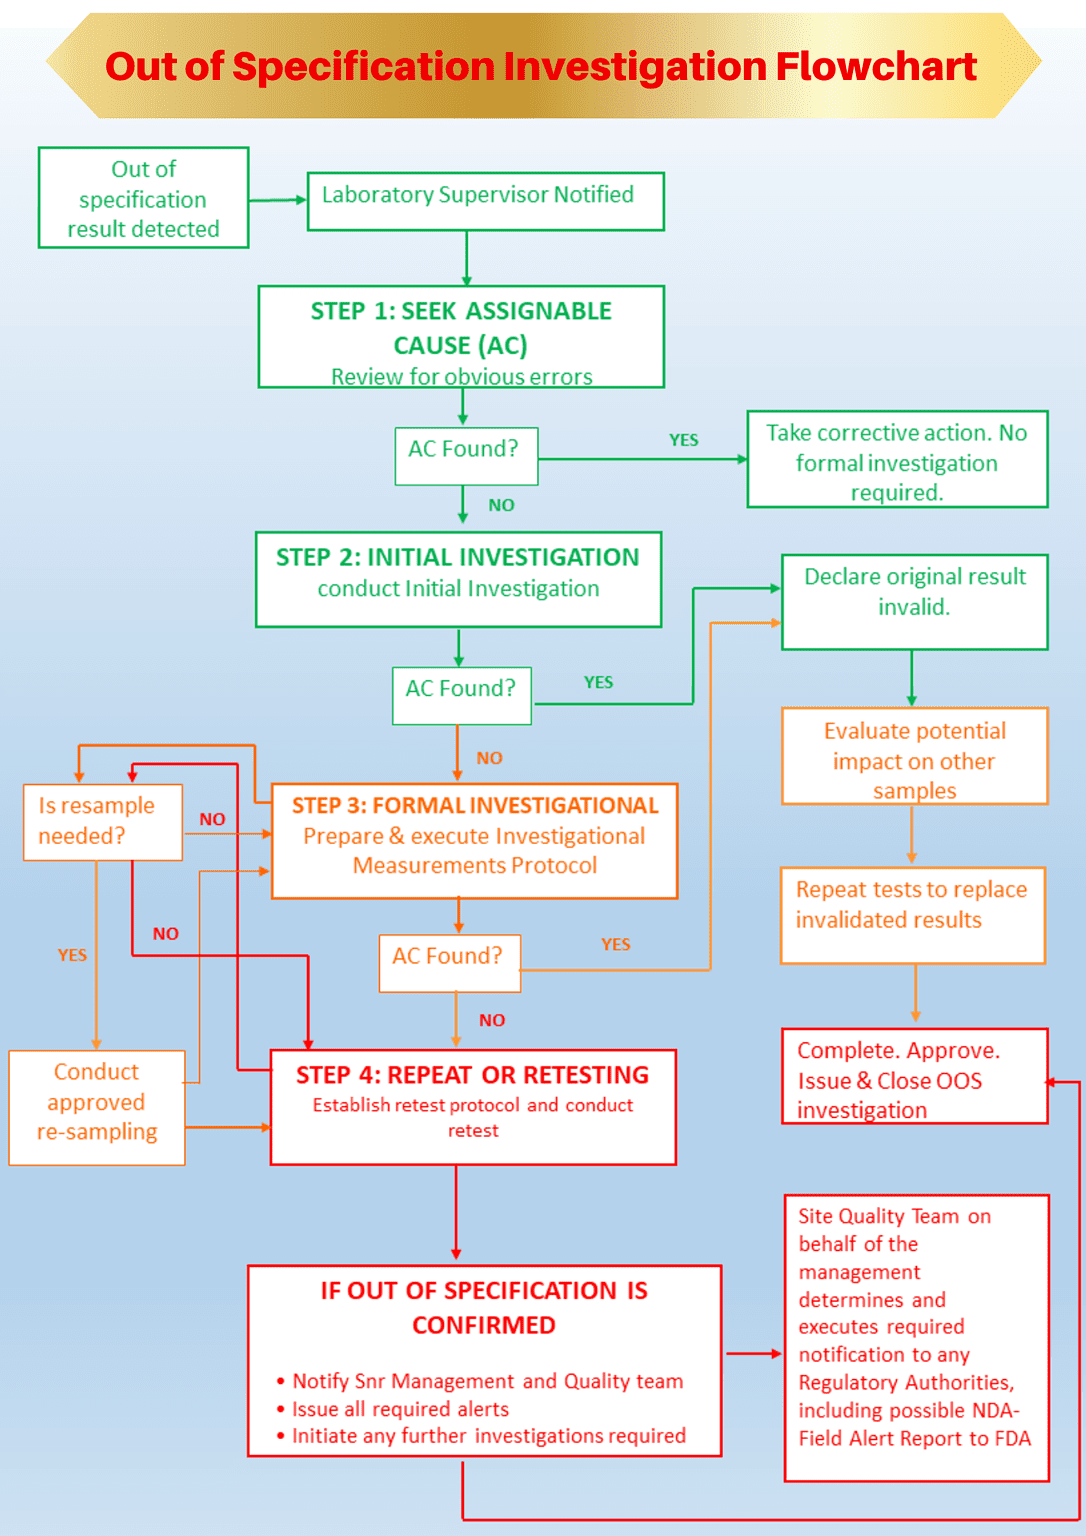 Out of Specification Investigation Flowchart